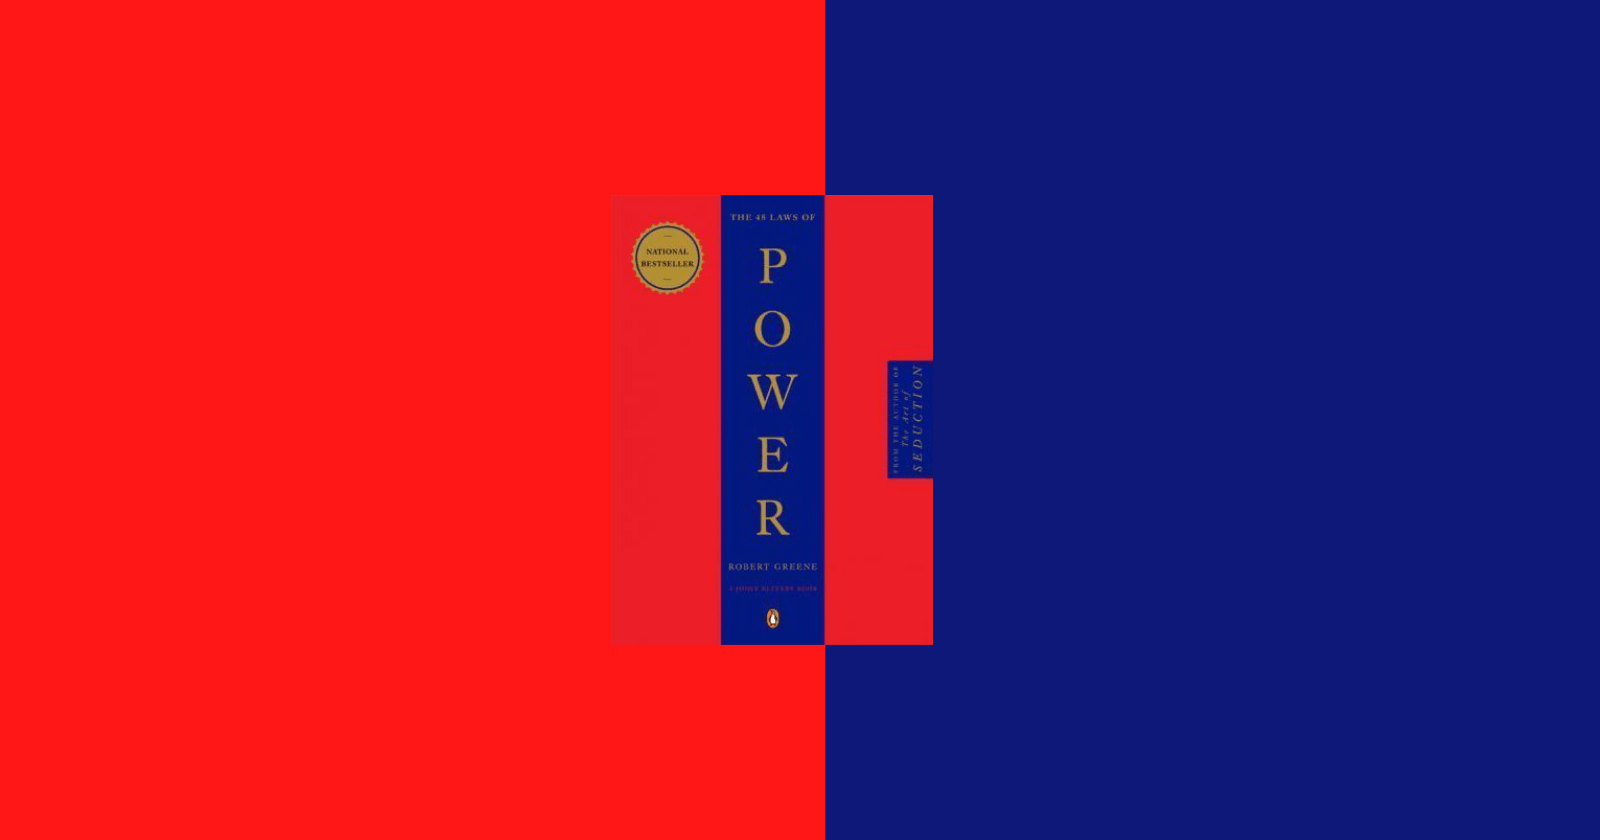 The 48 Laws of Power by Robert Greene (Book Review)